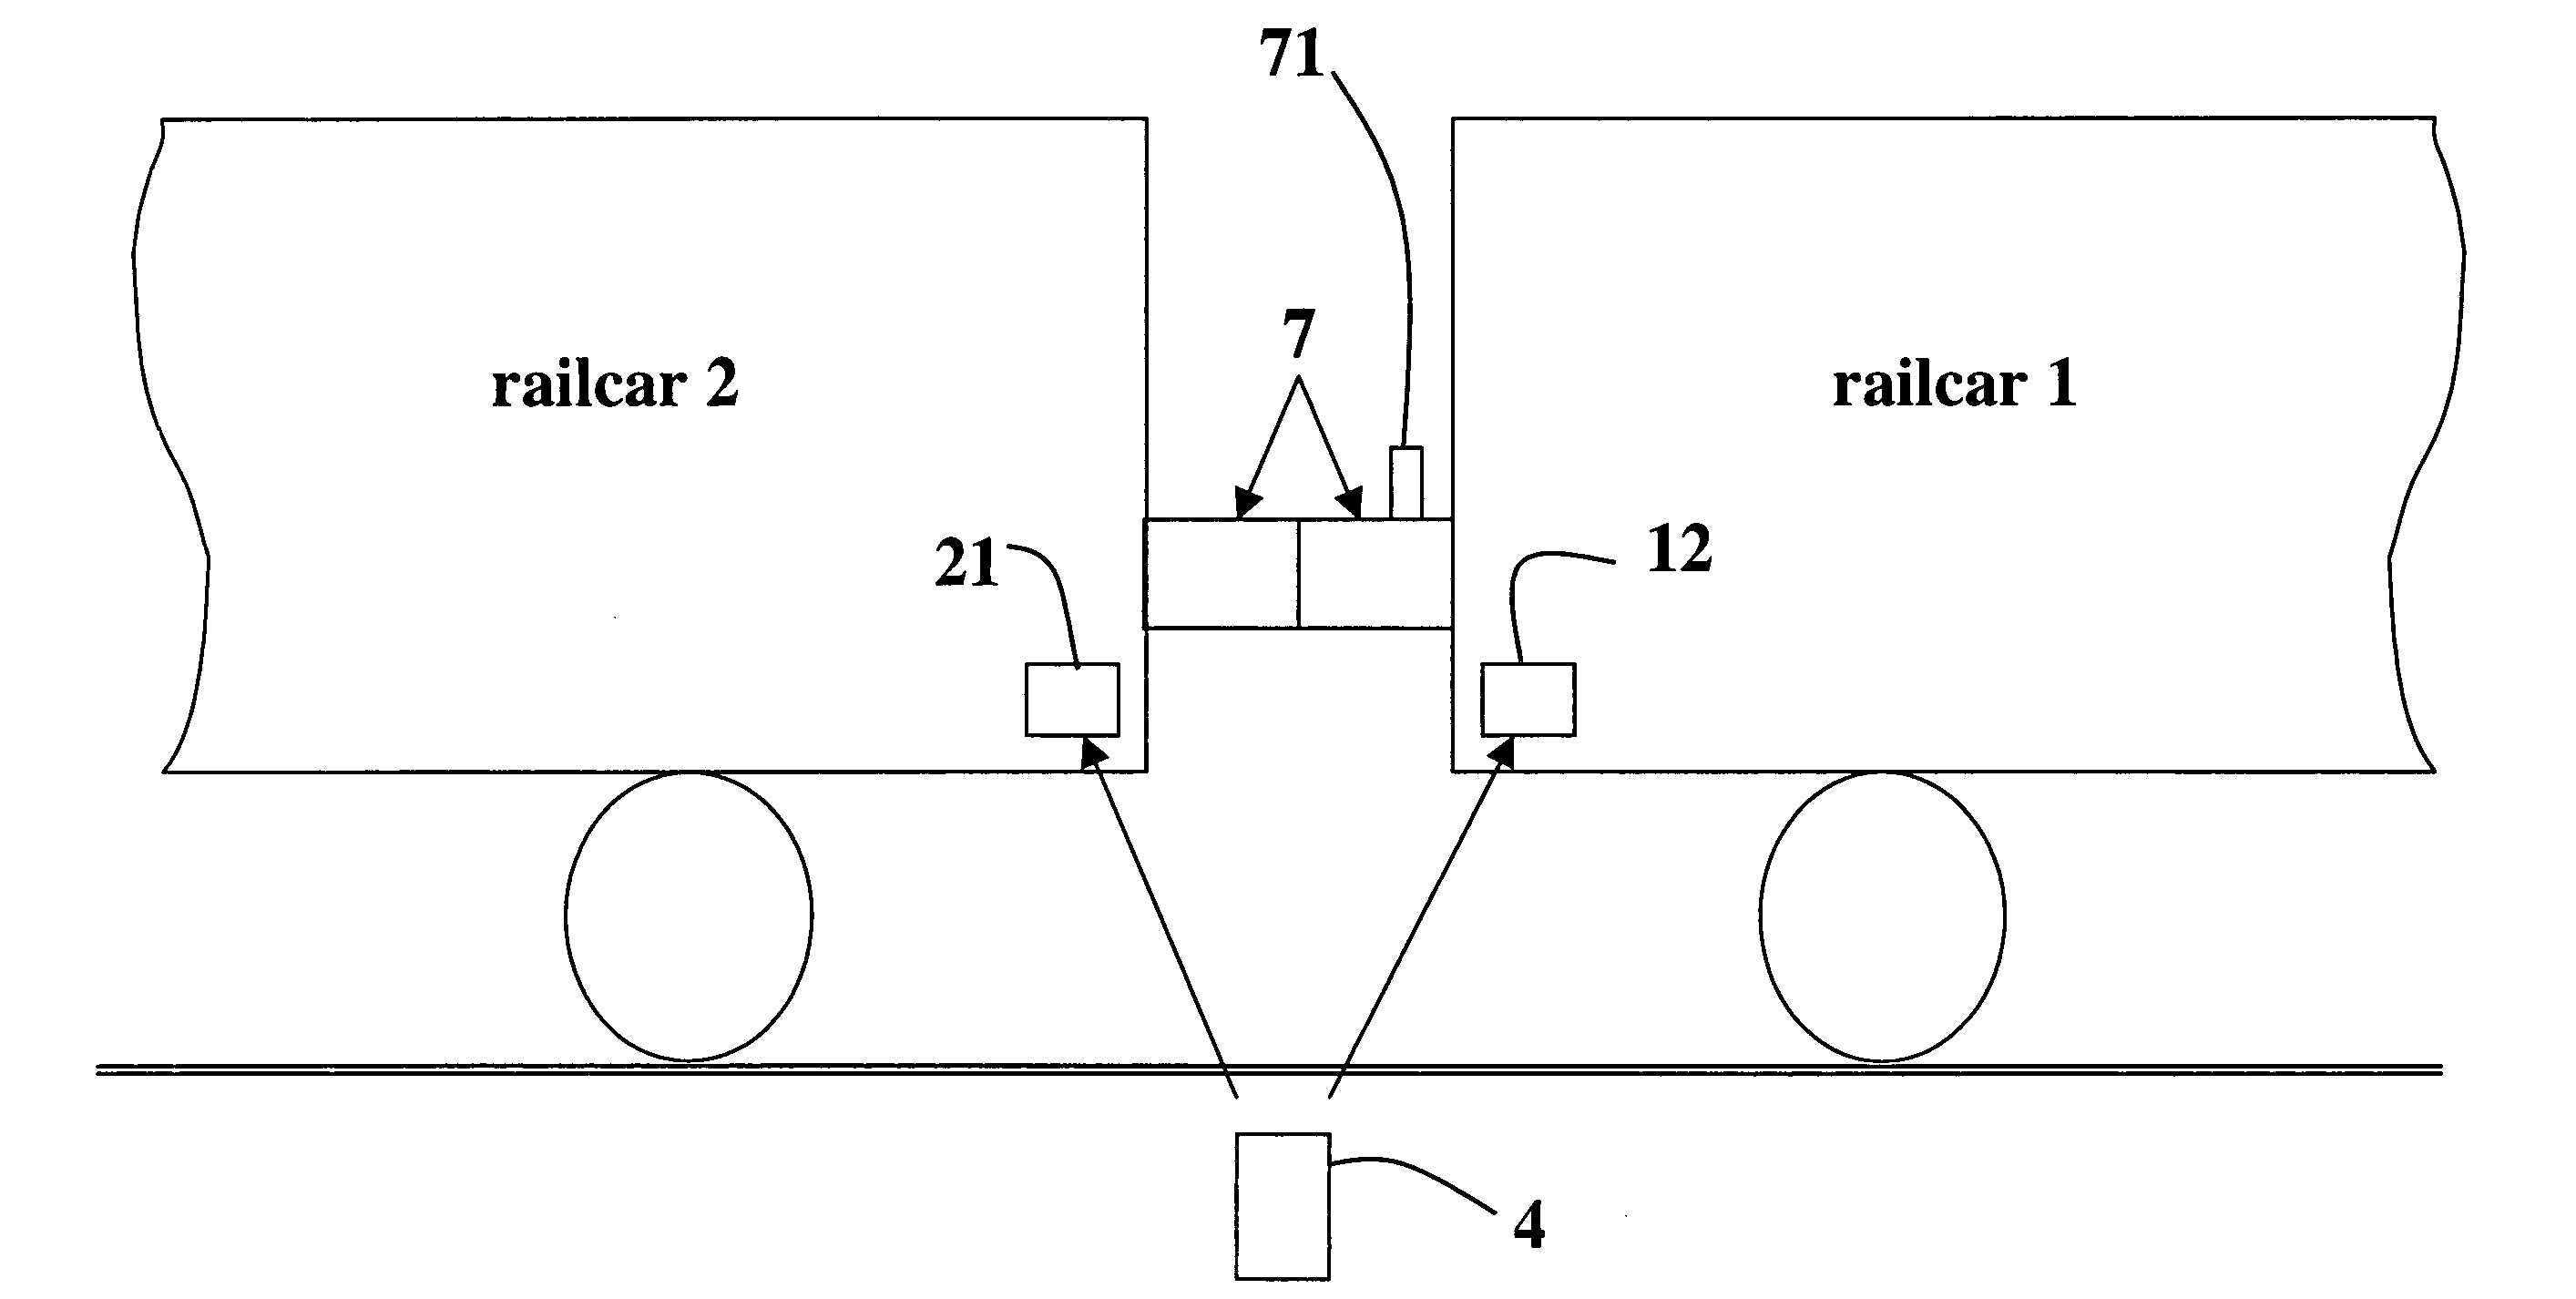 System for tracking railcars in a railroad environment